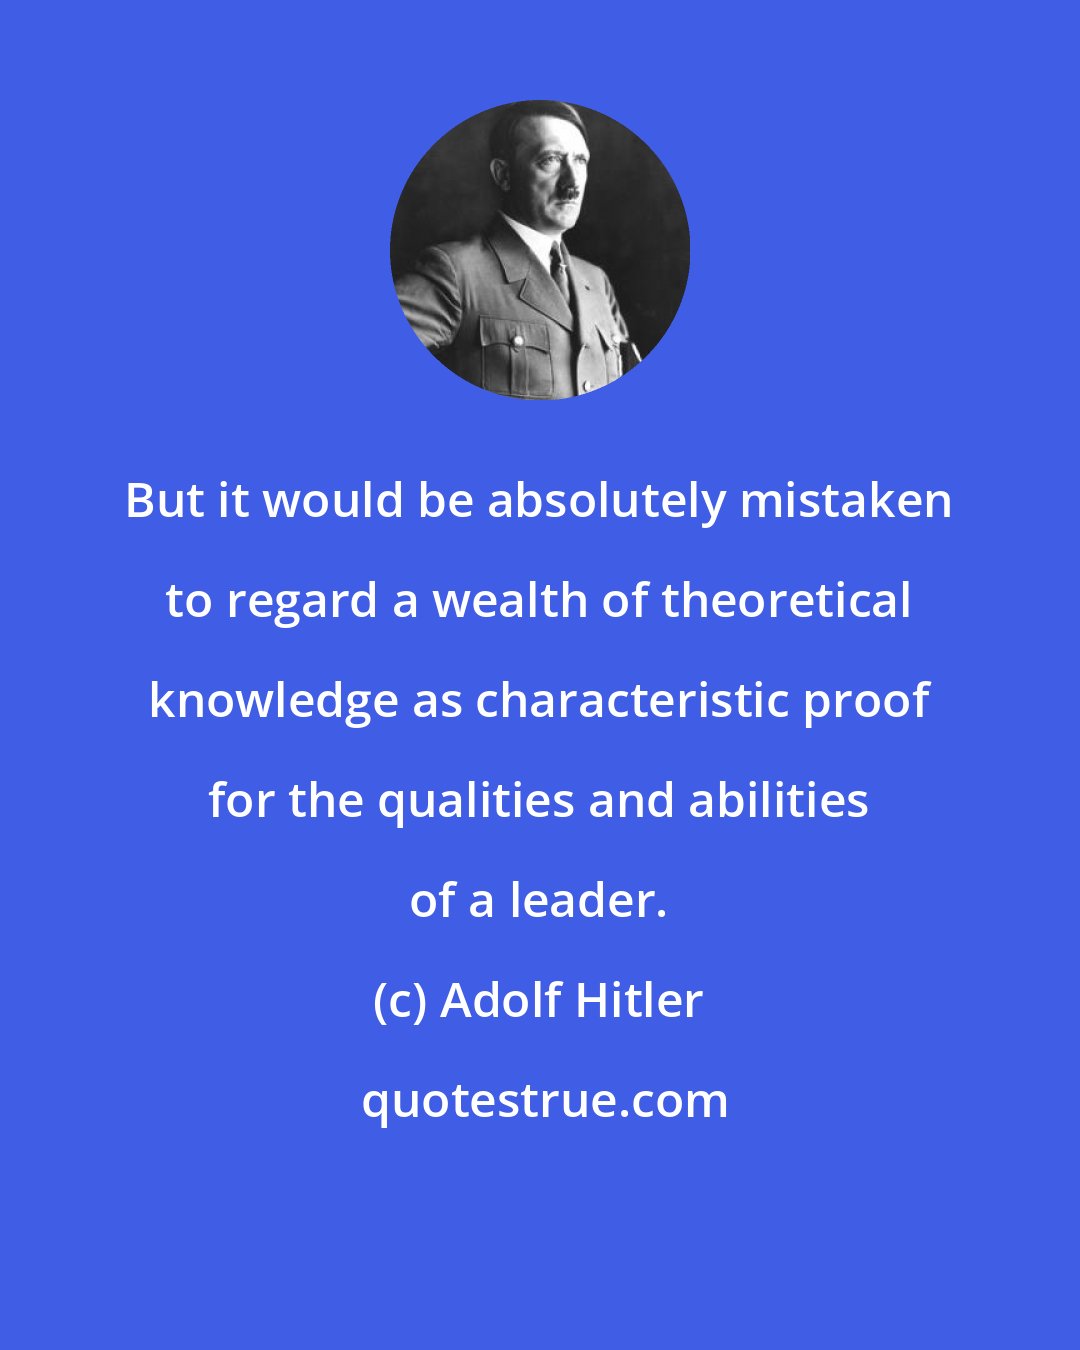 Adolf Hitler: But it would be absolutely mistaken to regard a wealth of theoretical knowledge as characteristic proof for the qualities and abilities of a leader.